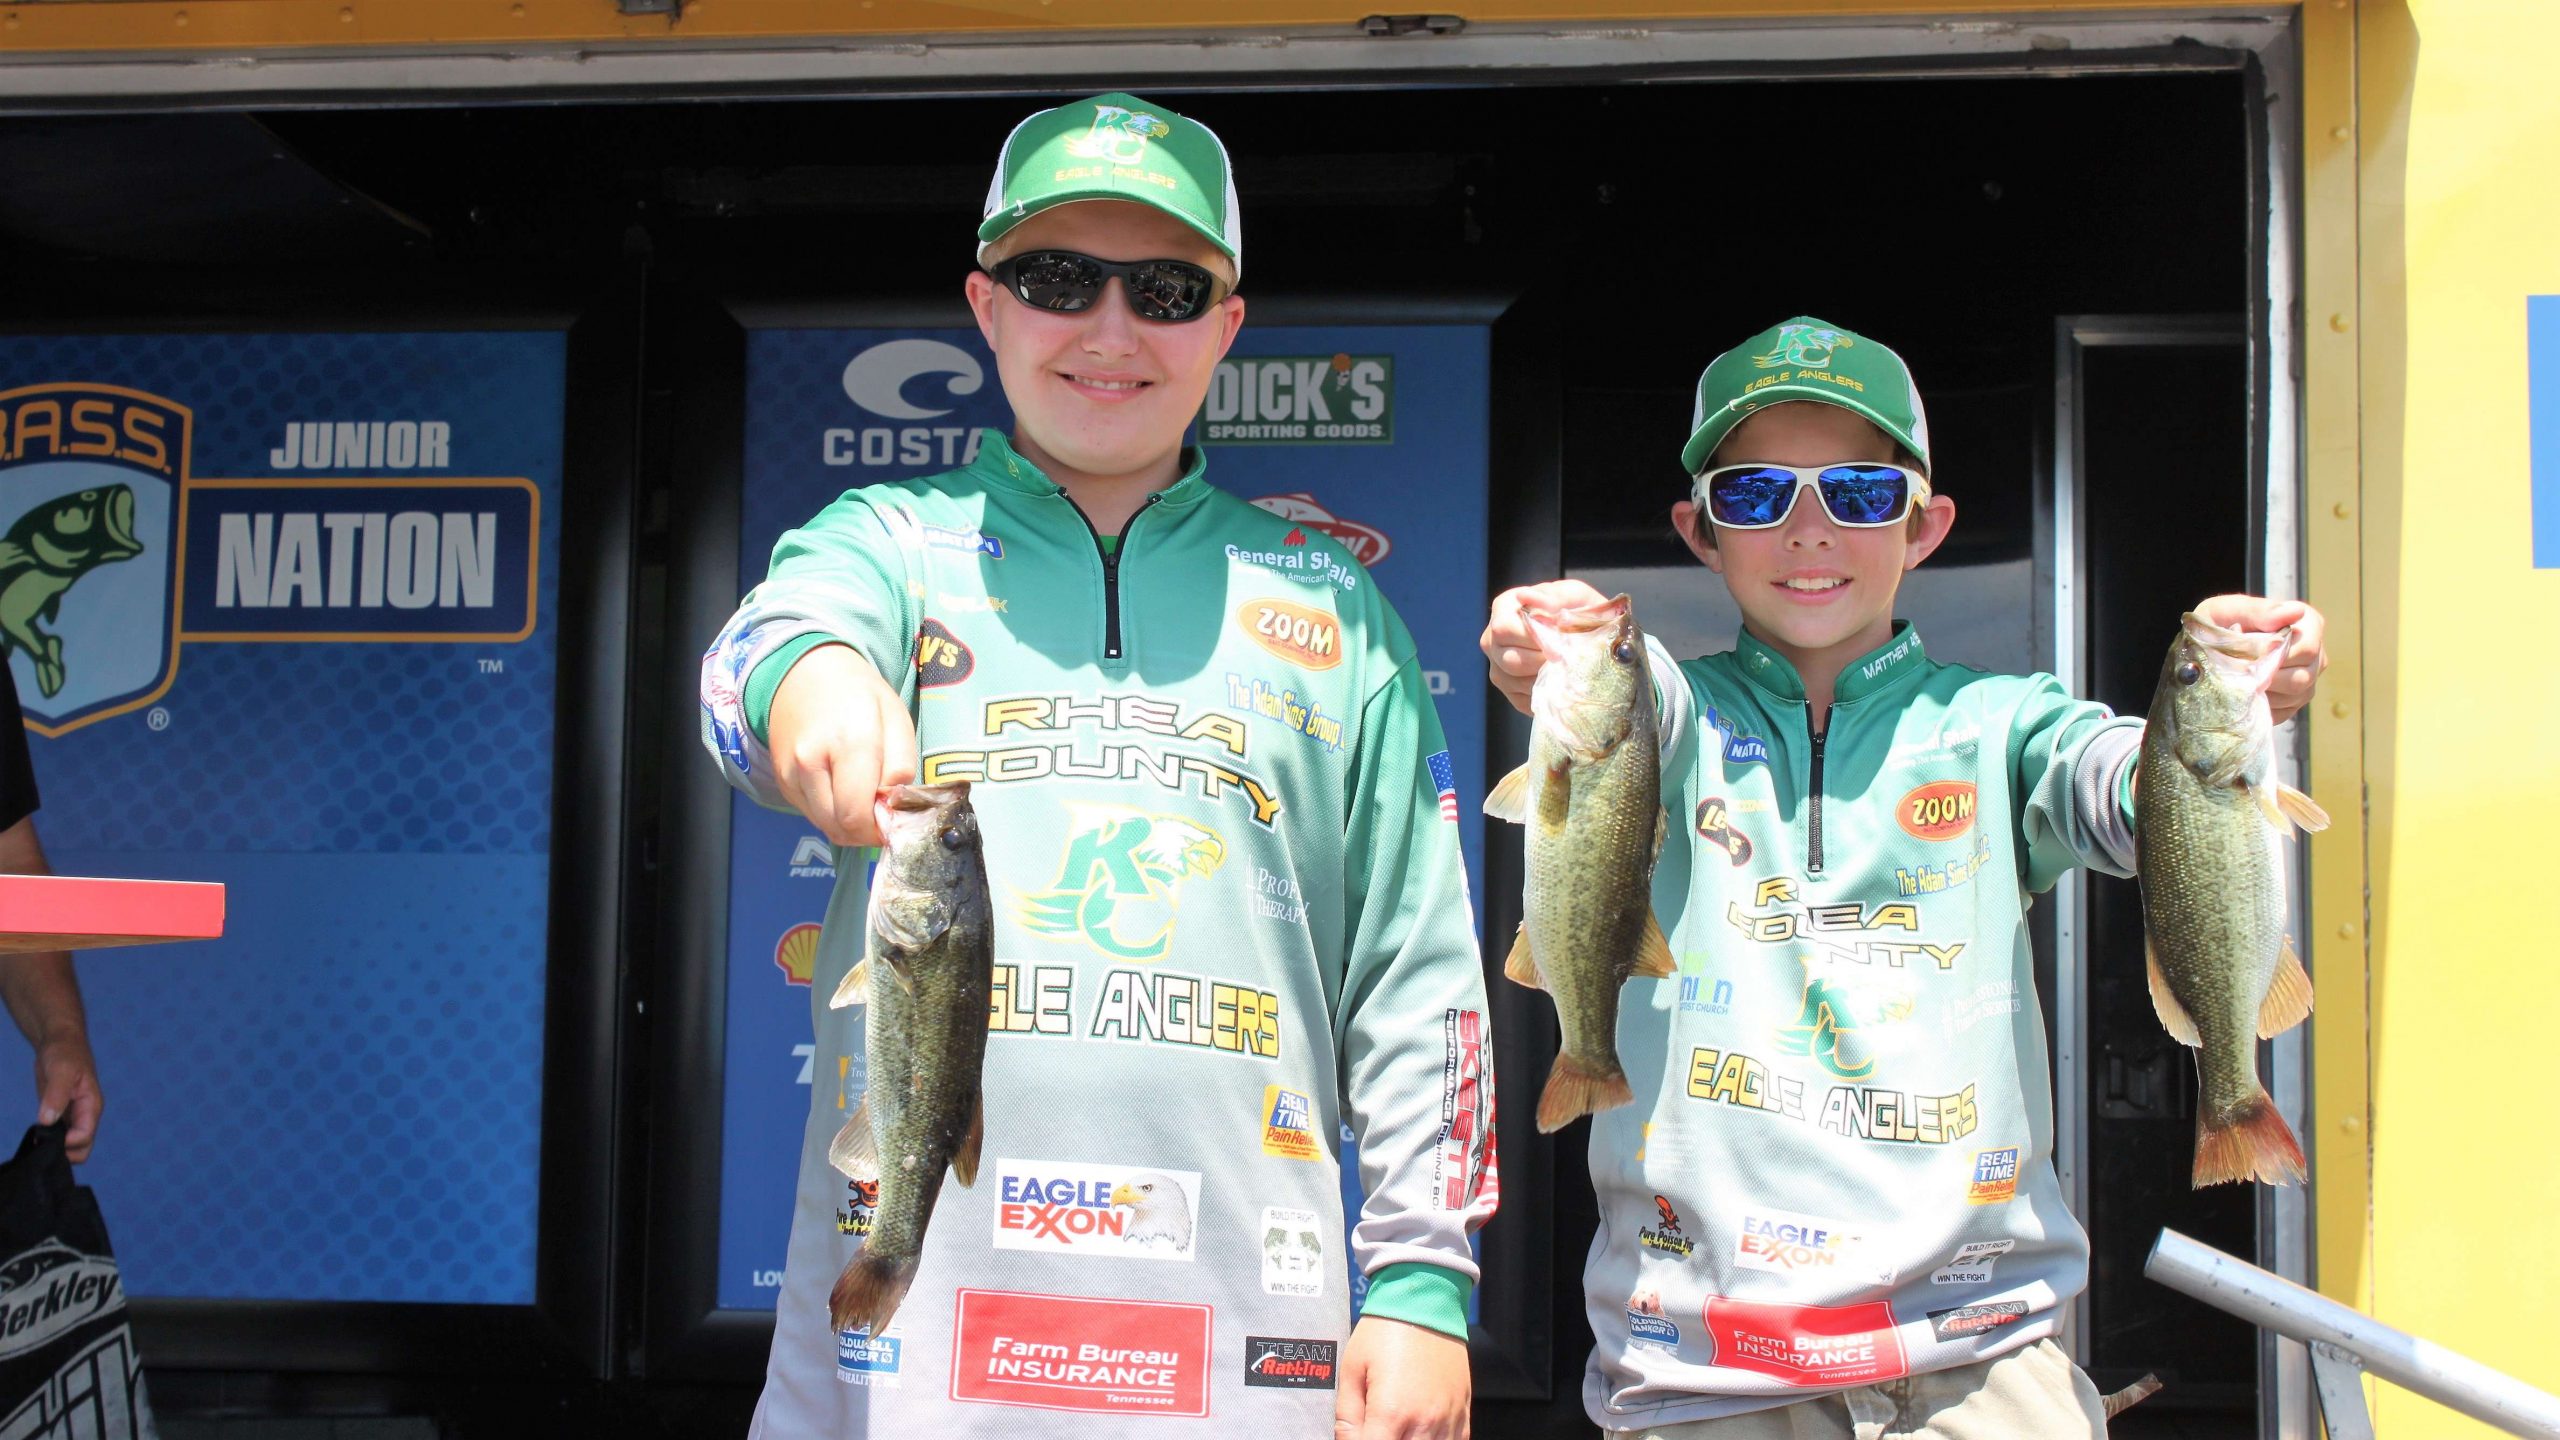  David Derlak and Andon Goins of Tennessee are in 39th place with 2-11.
